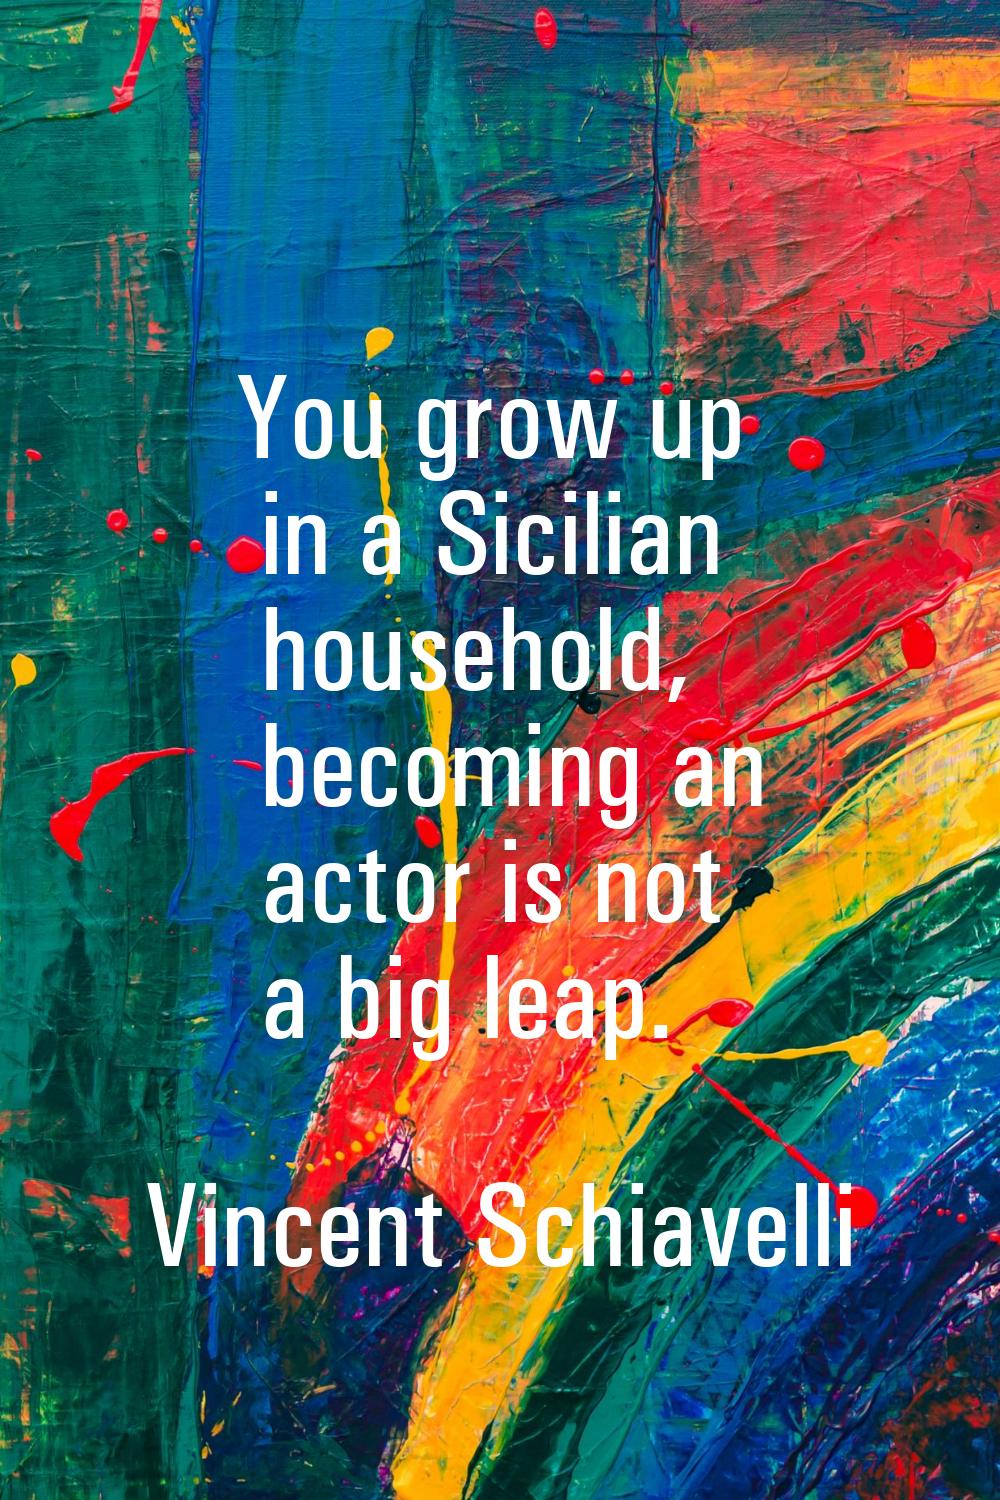 You grow up in a Sicilian household, becoming an actor is not a big leap.